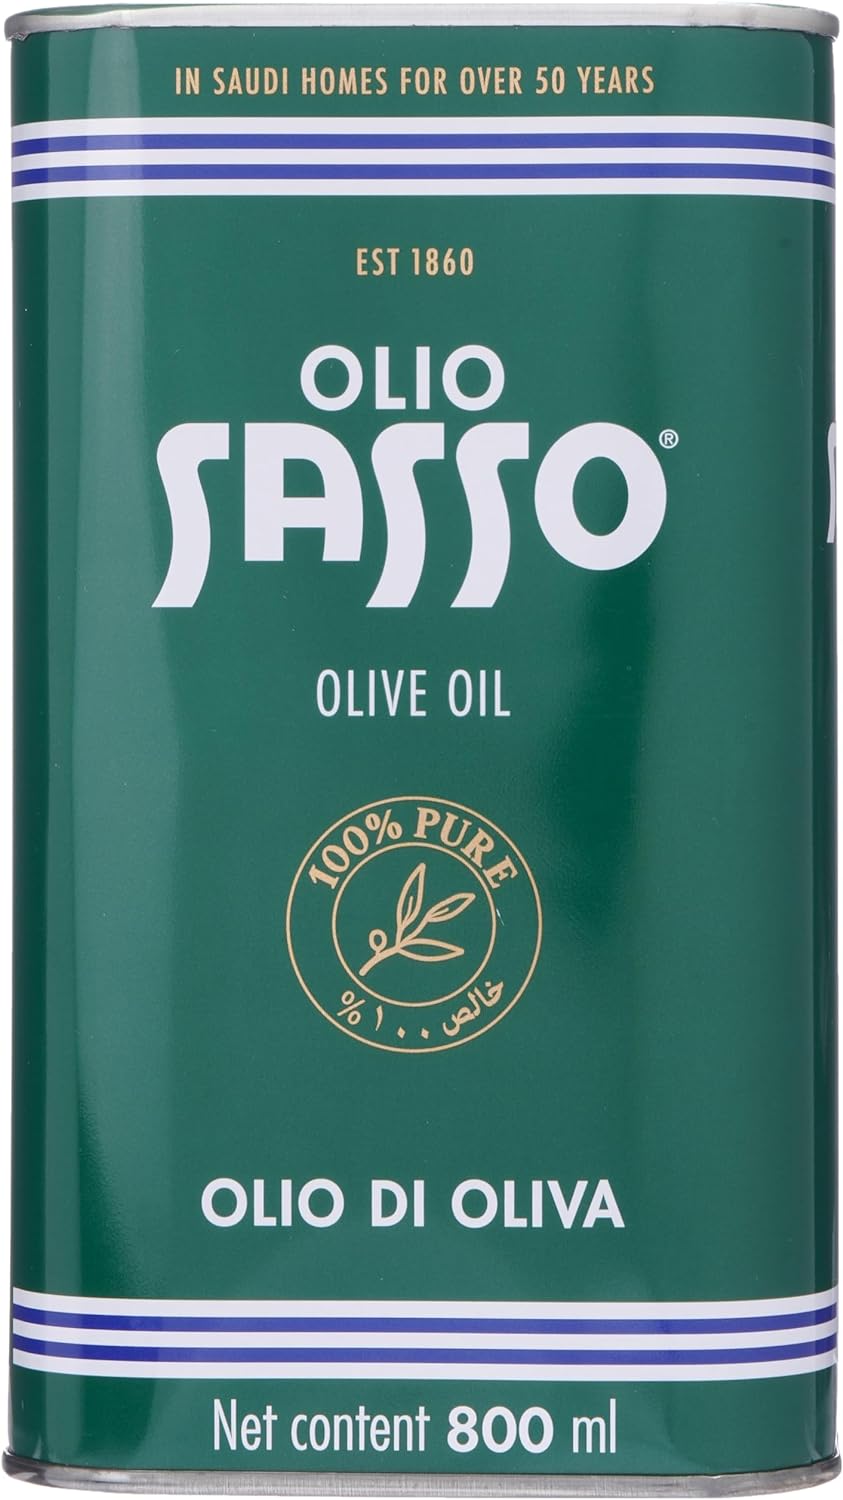 Sasso Pure Olive Oil, 800 Ml - Pack Of 1